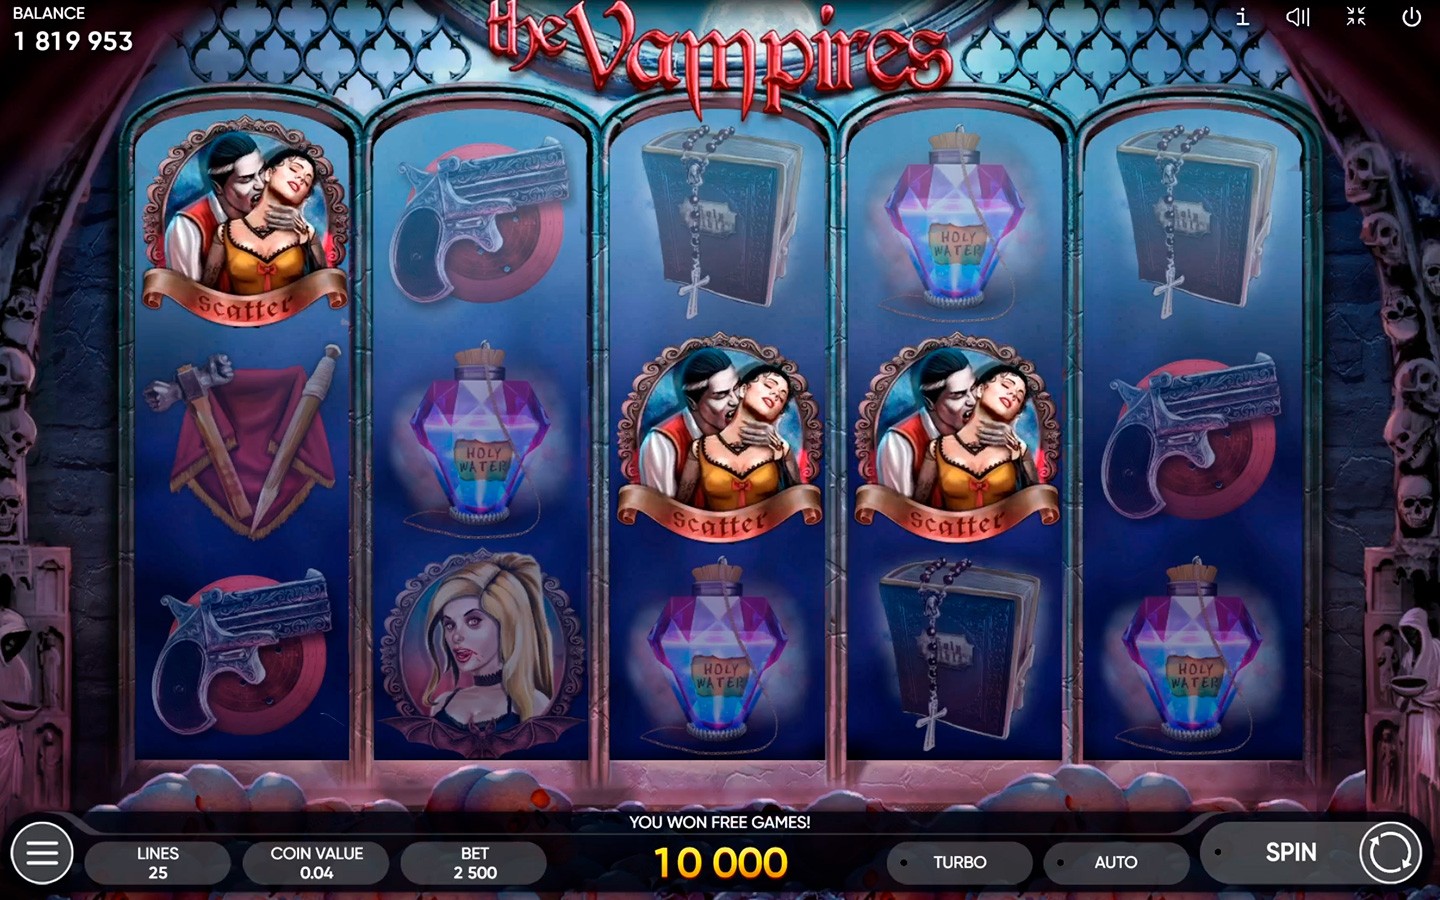 Book of Horror - Friday the 13th Free Spins Big Win! (New slot by Spinomenal)